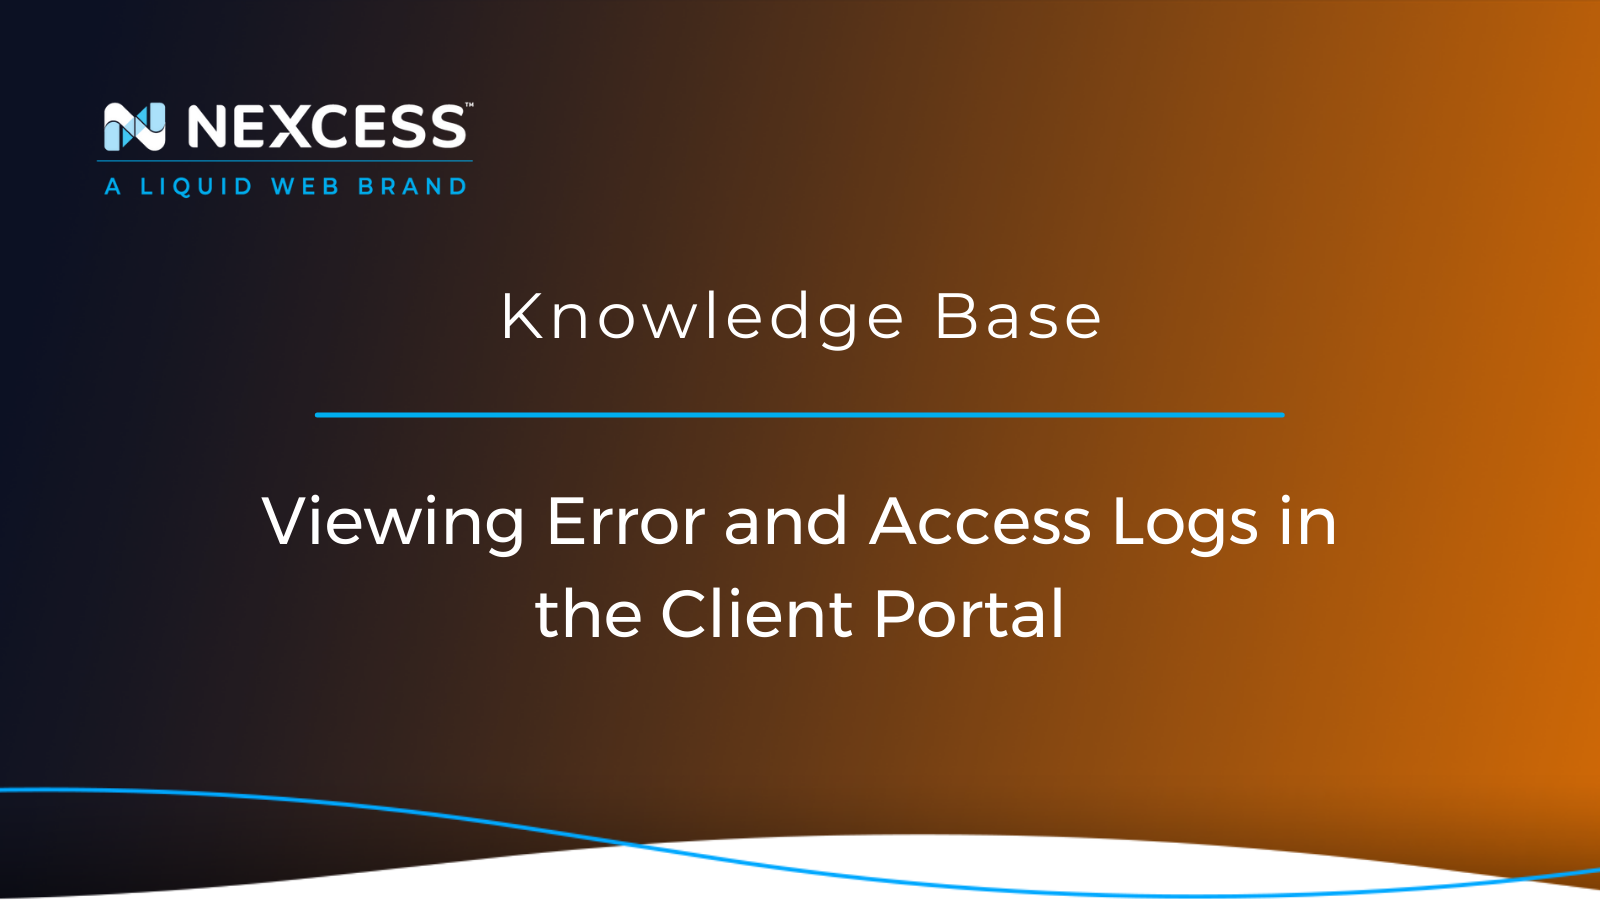 Viewing Error and Access Logs in the Client Portal